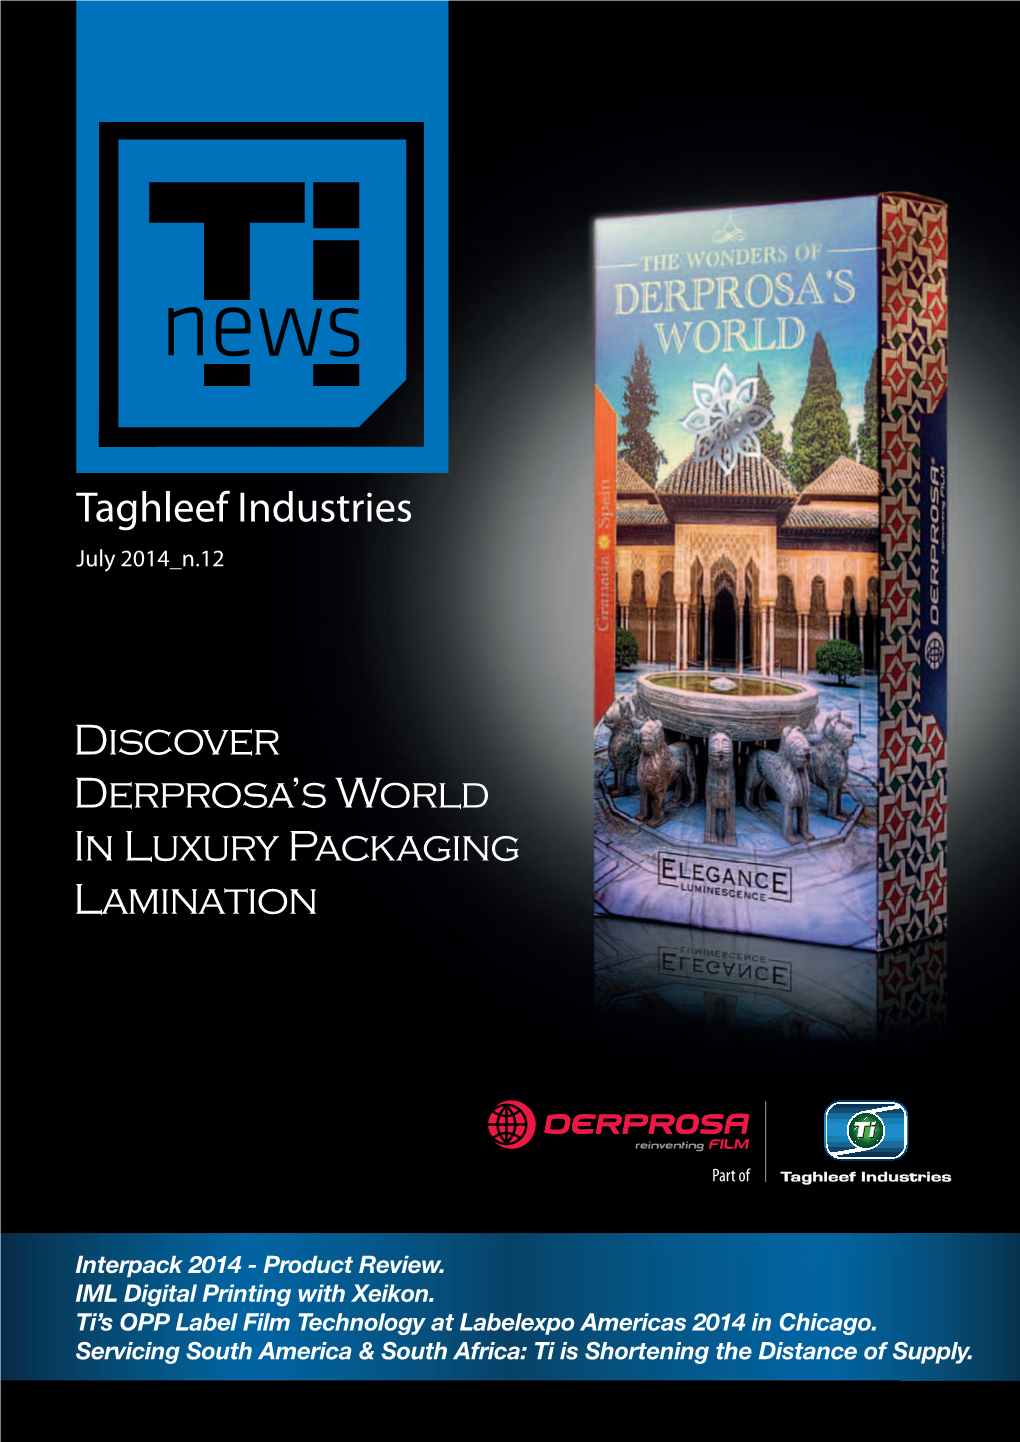 Discover Derprosa's World in Luxury Packaging Lamination